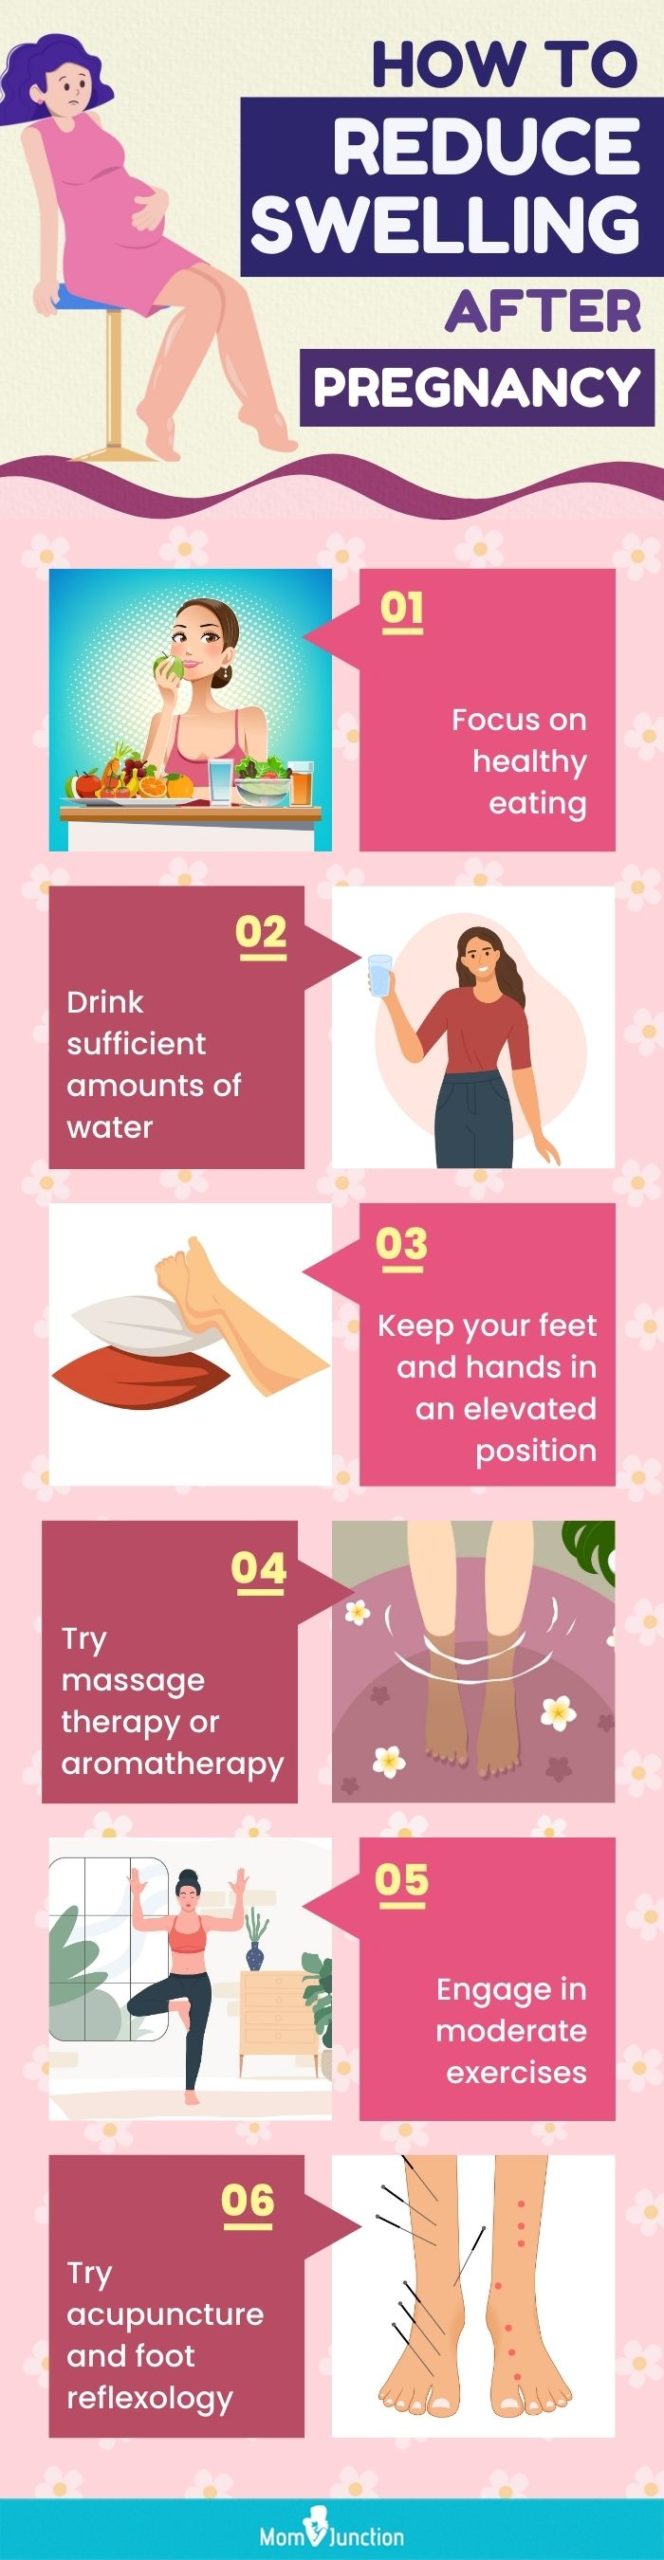 how to reduce swelling after pregnancy (infographic)